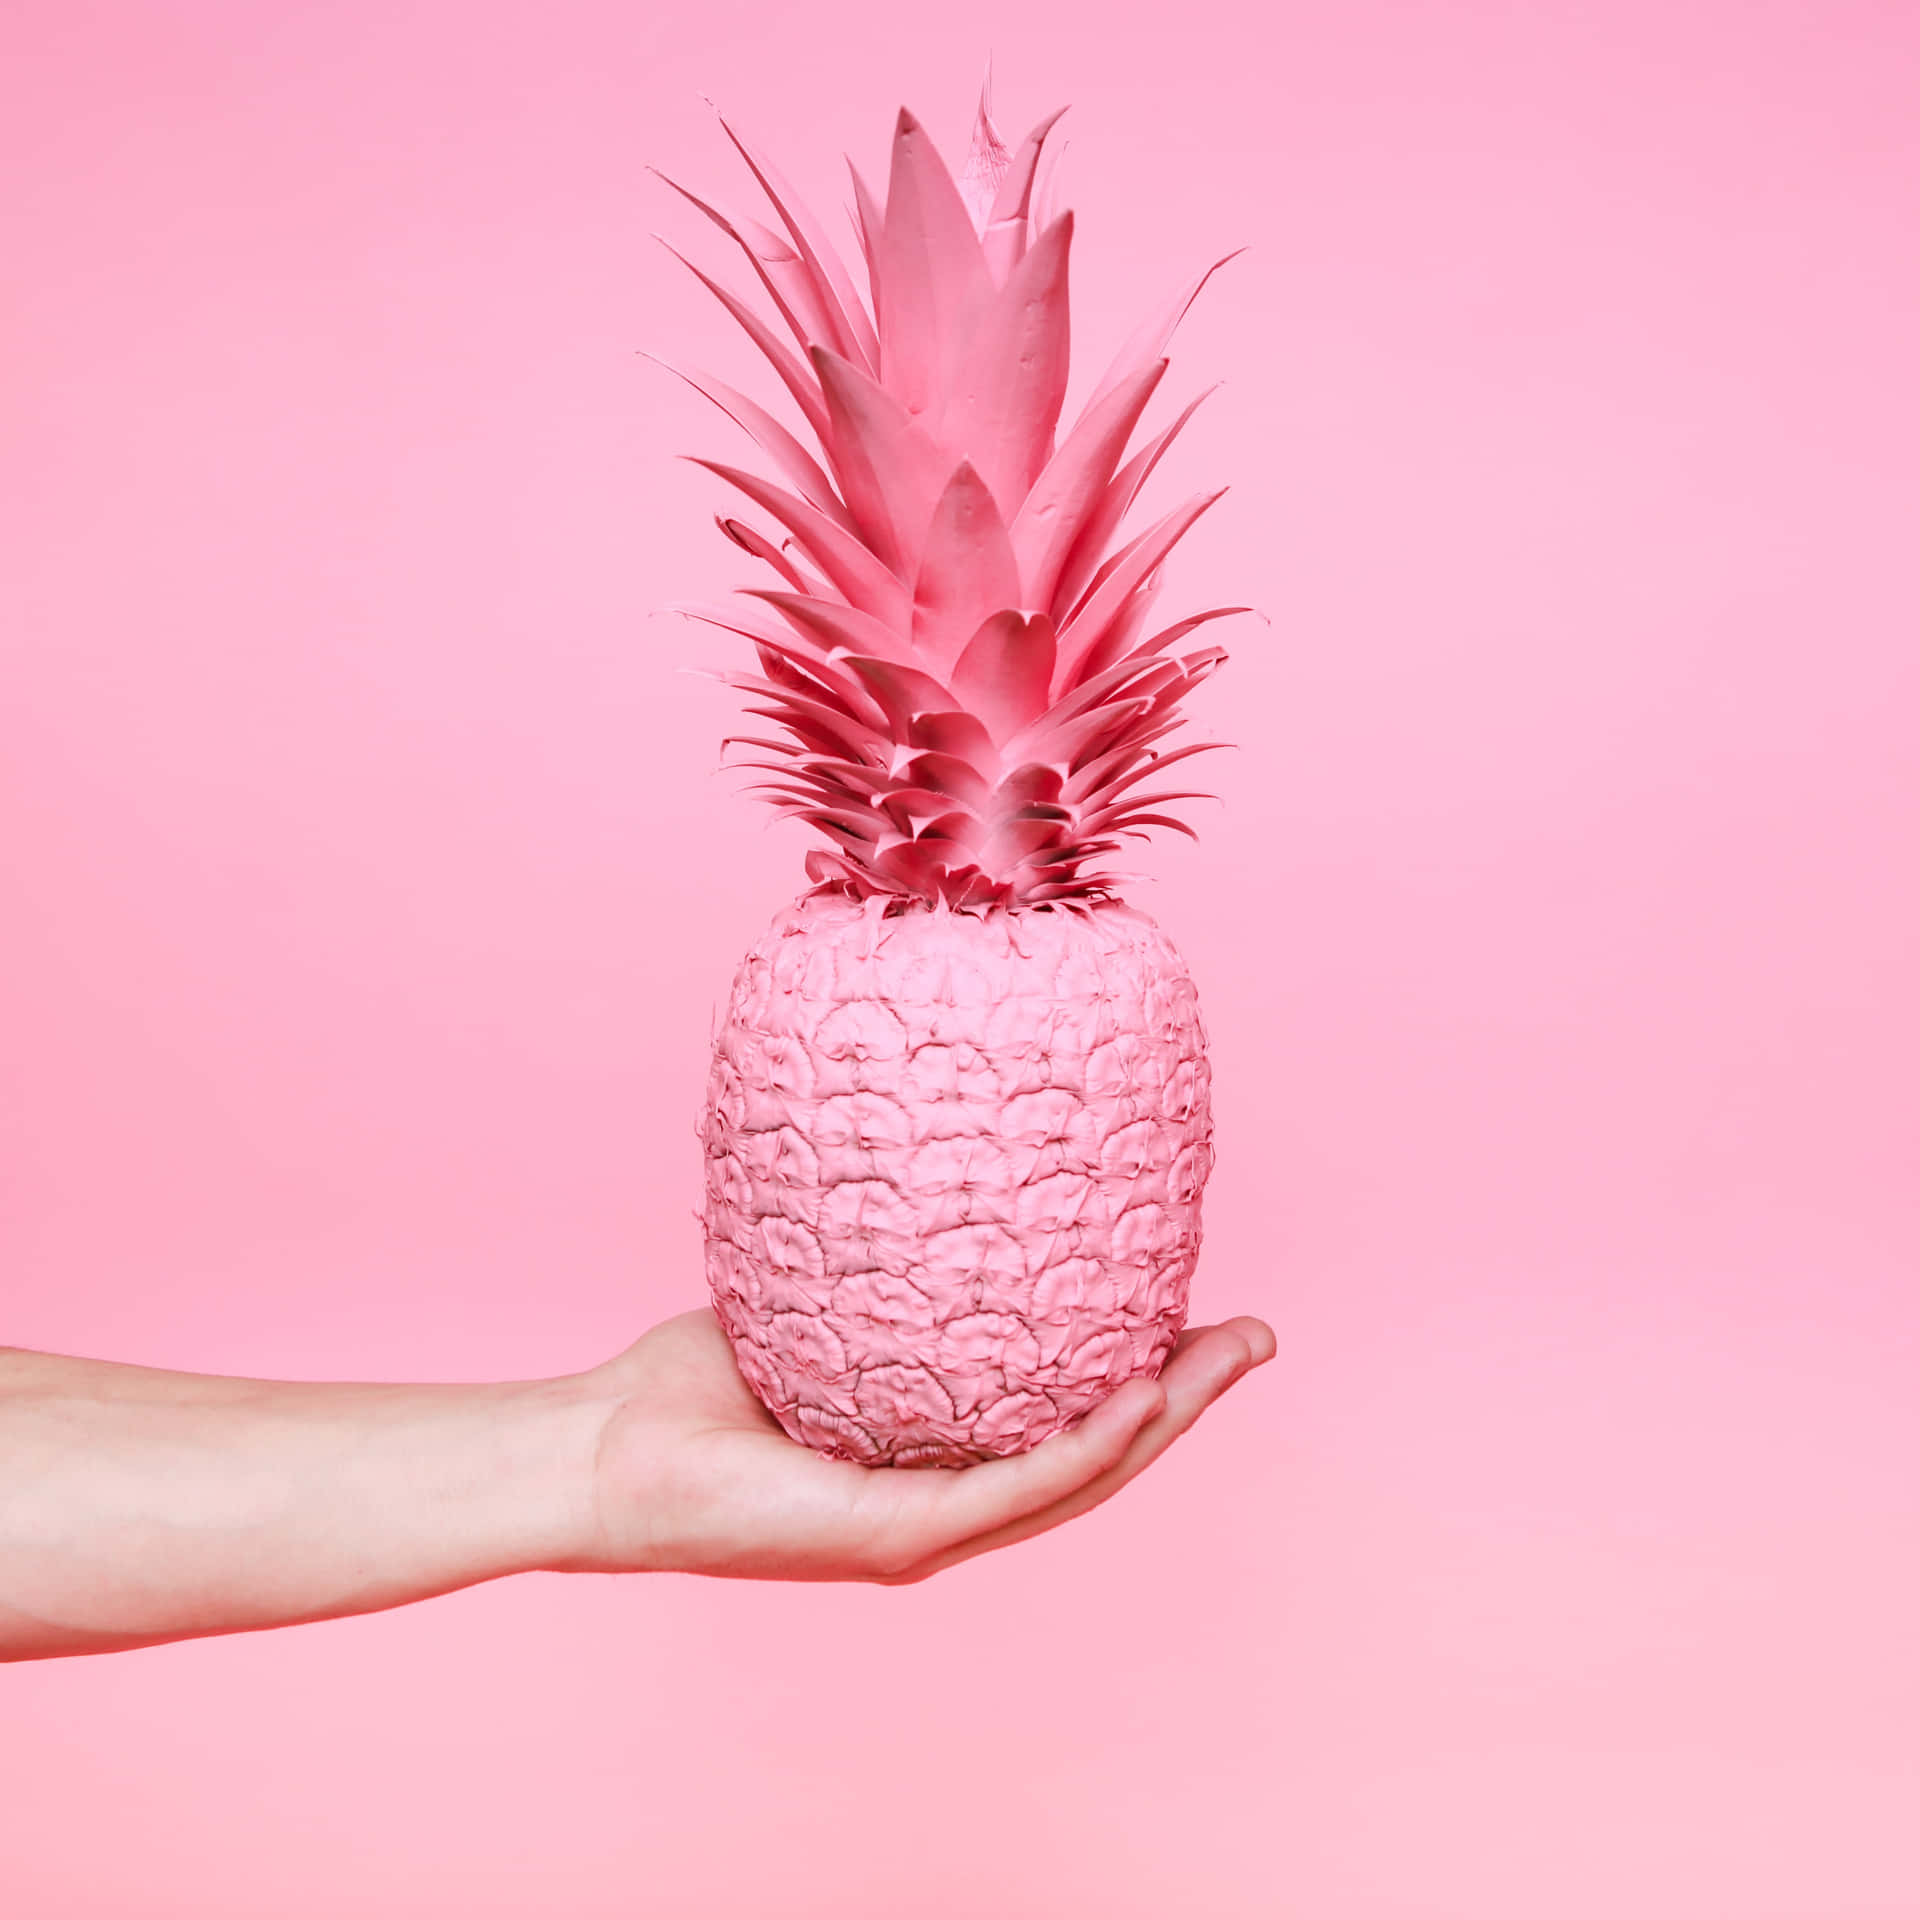 A Hand Holding A Pink Pineapple On A Pink Background